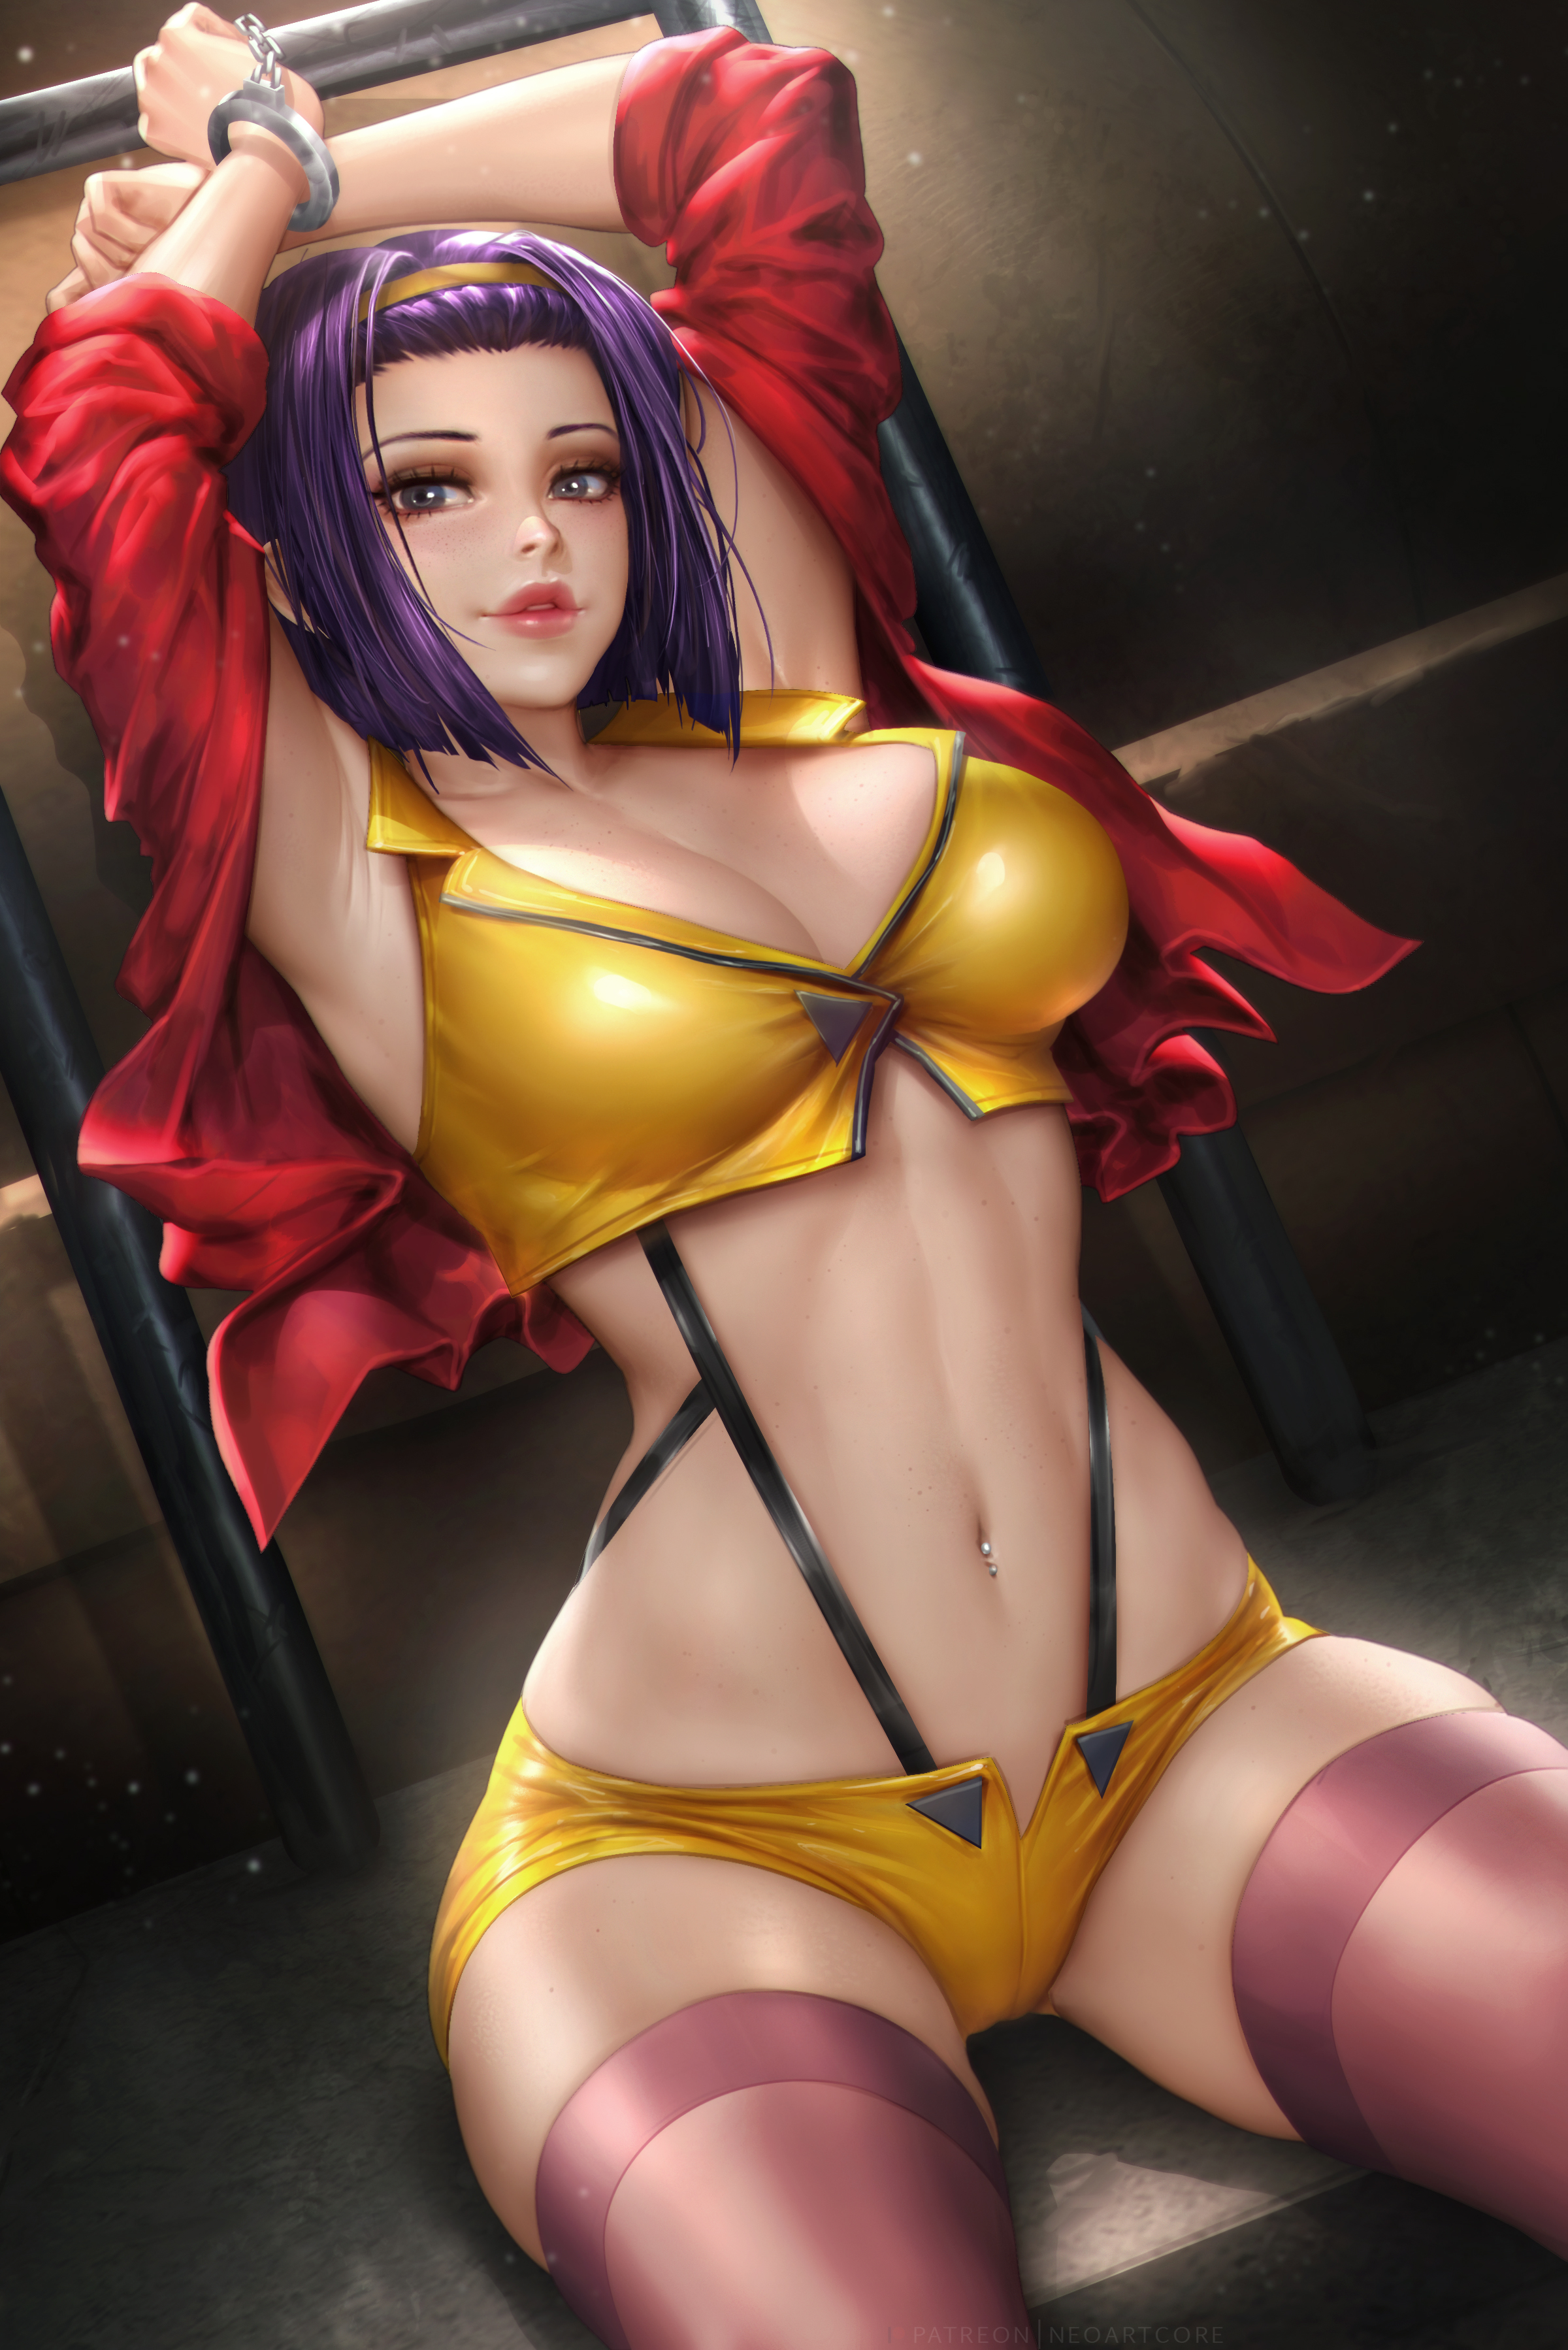 Anime 2400x3597 Faye Valentine Cowboy Bebop anime anime girls purple hair looking at viewer headband freckles parted lips jacket yellow clothing cleavage crop top short shorts belly pierced navel lingerie thick thigh stockings sitting handcuffs portrait display artwork drawing digital art illustration fan art NeoArtCorE (artist) arms up